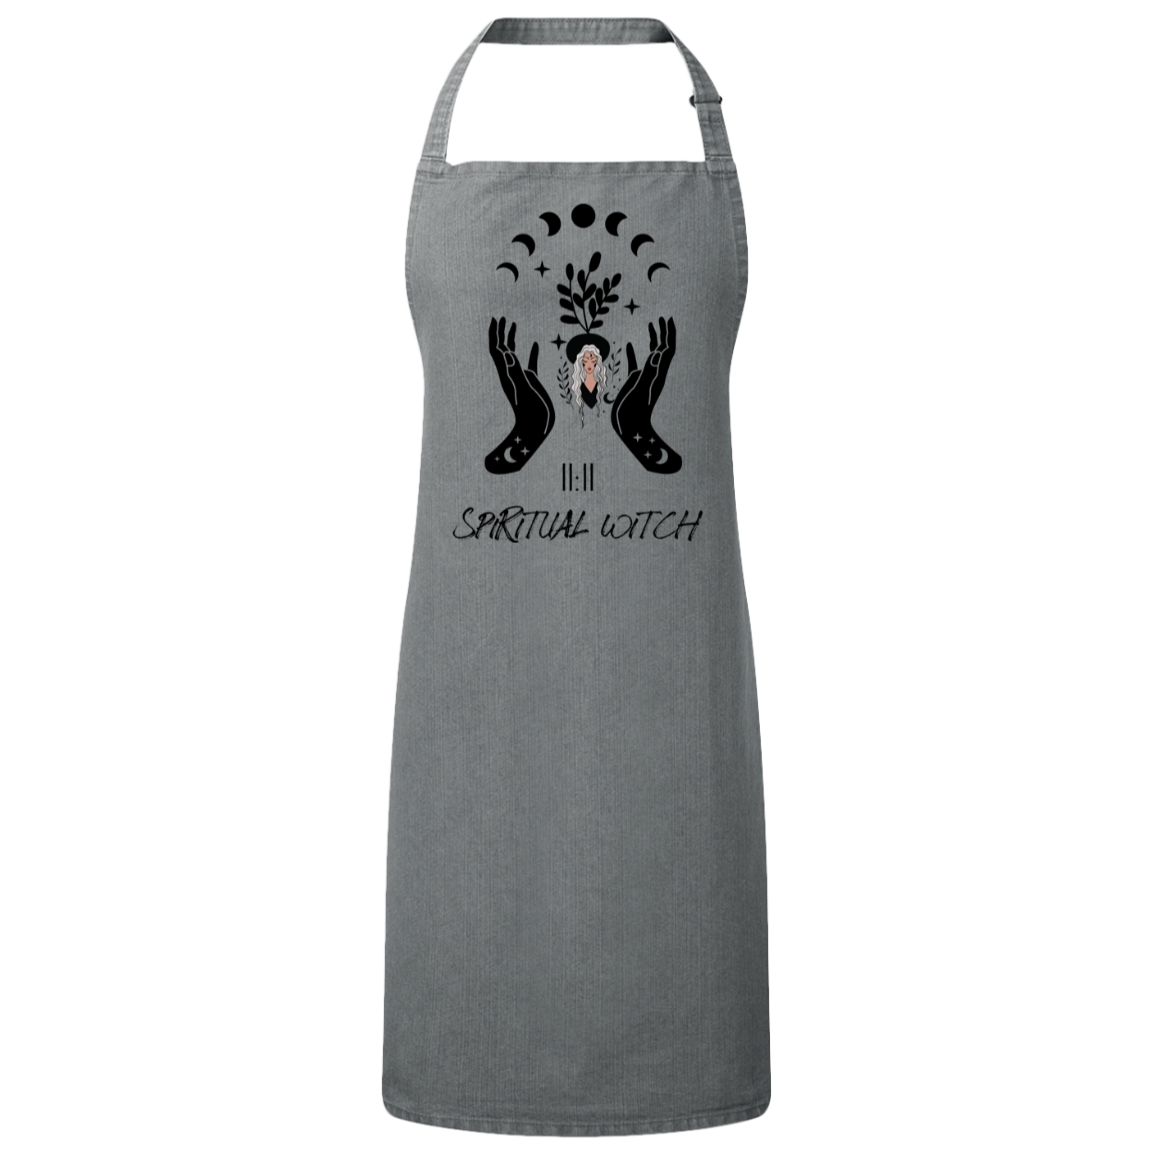 SPIRITUAL WITCH Apron for the kitchen witch!